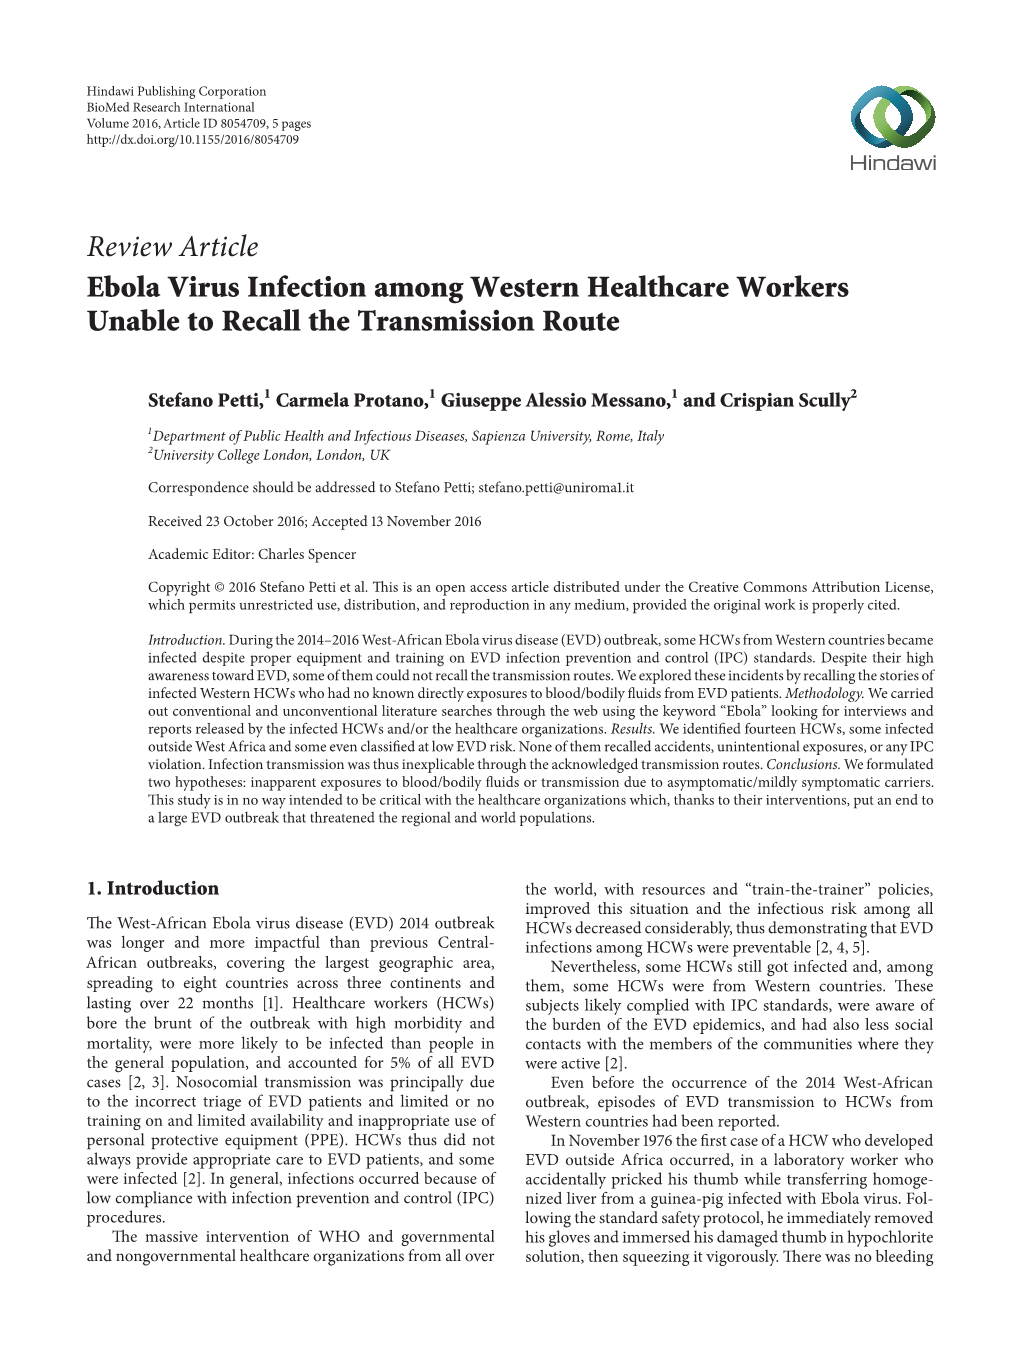 Review Article Ebola Virus Infection Among Western Healthcare Workers Unable to Recall the Transmission Route